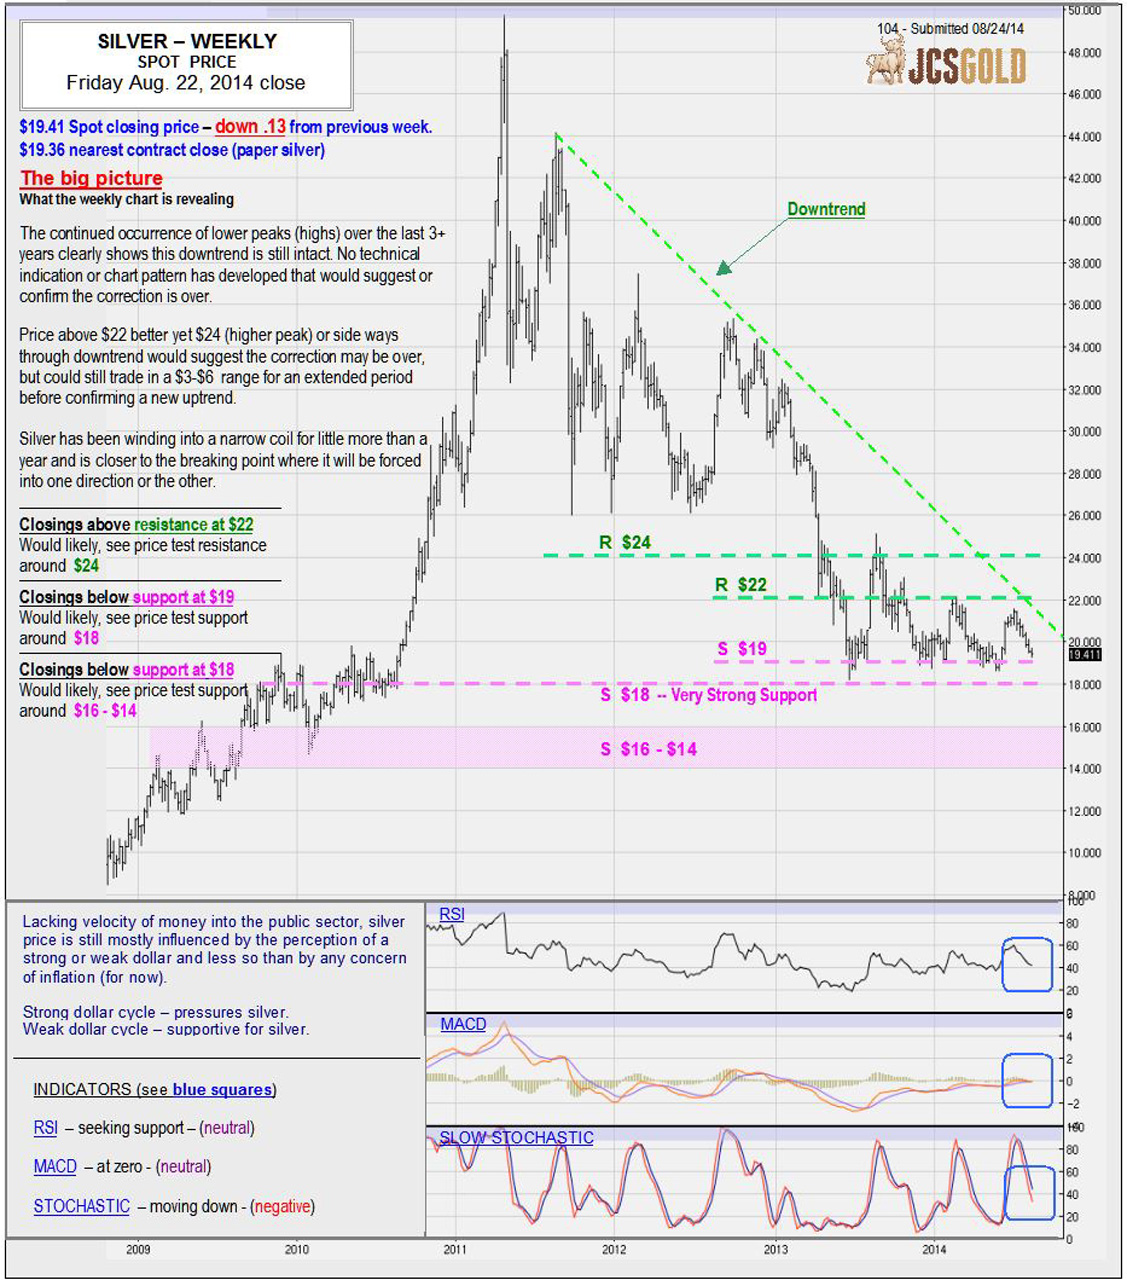 Aug 22, 2014 chart & commentary